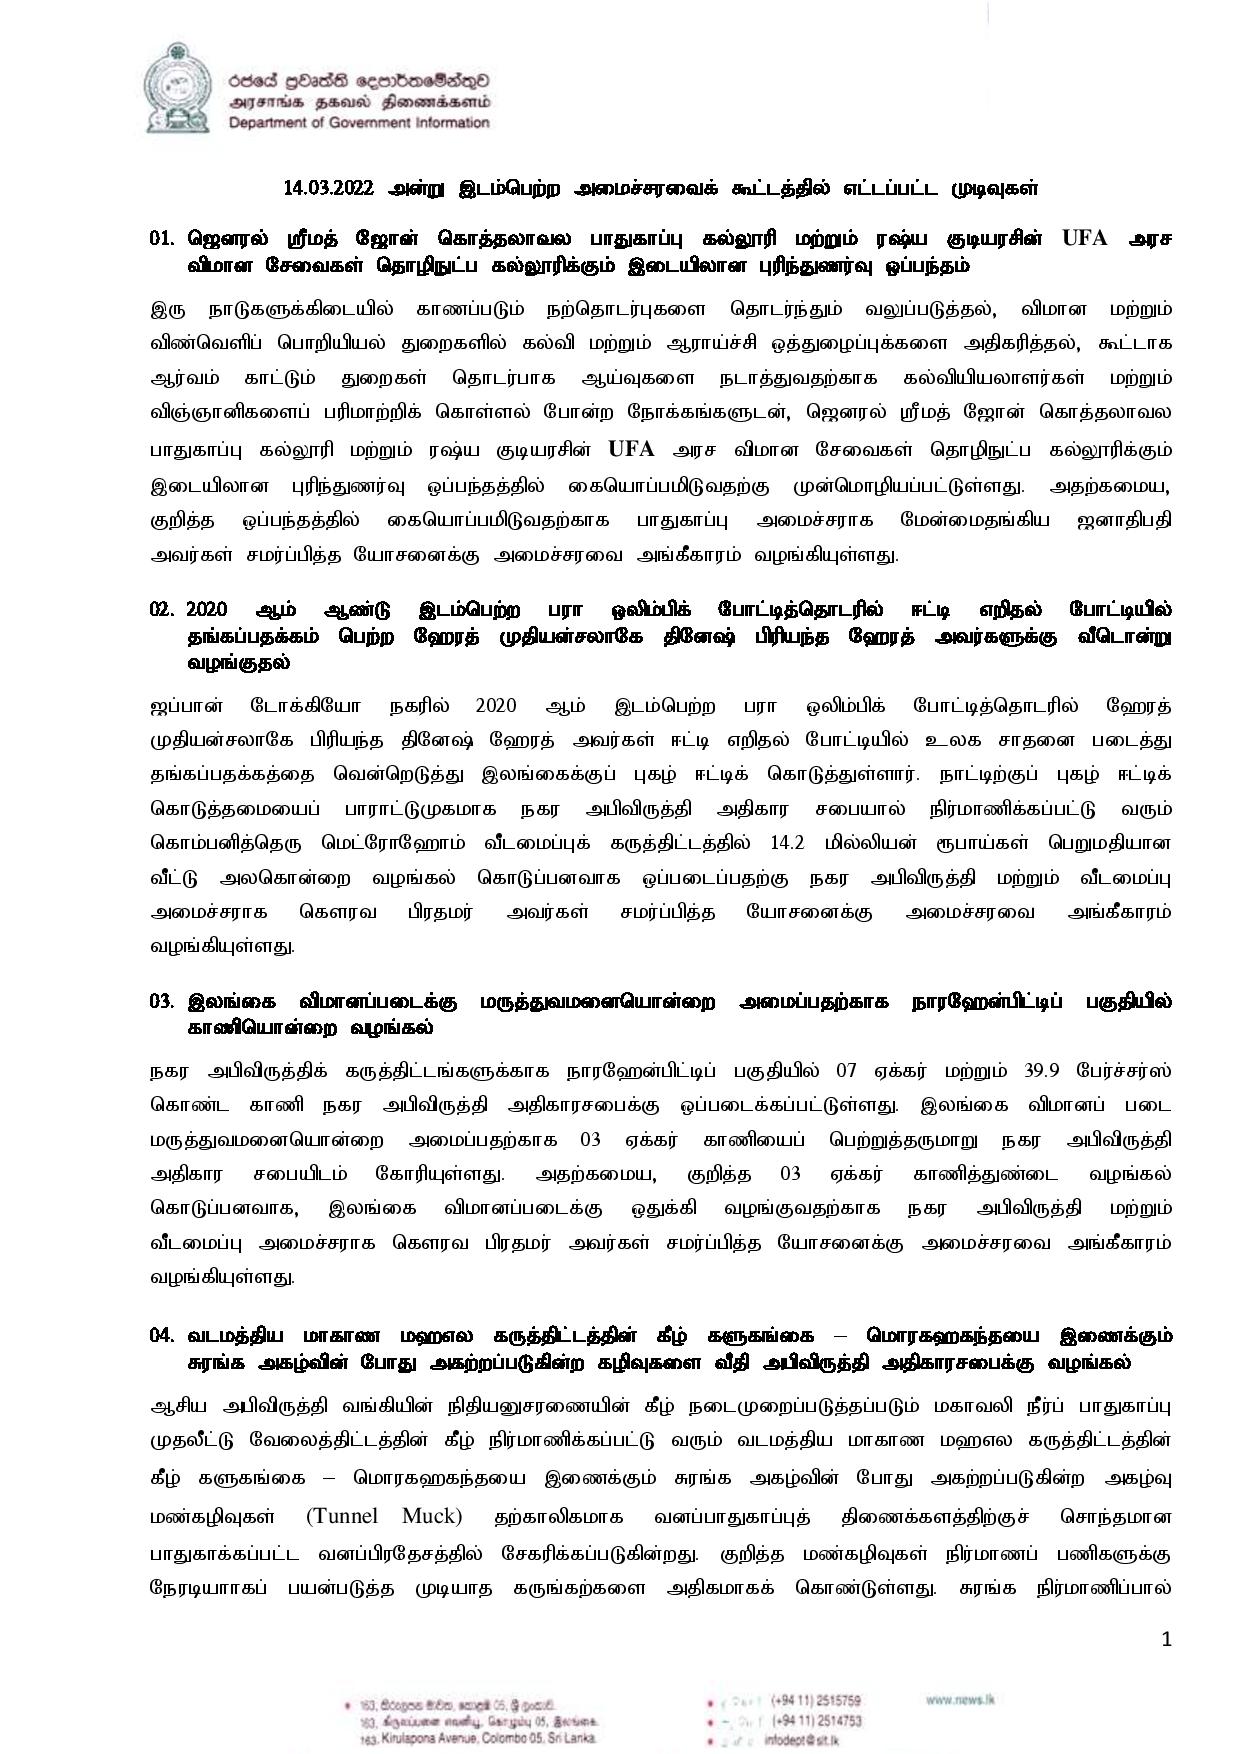 Cabinet Decisions on 14.03.2022 Tamil page 001